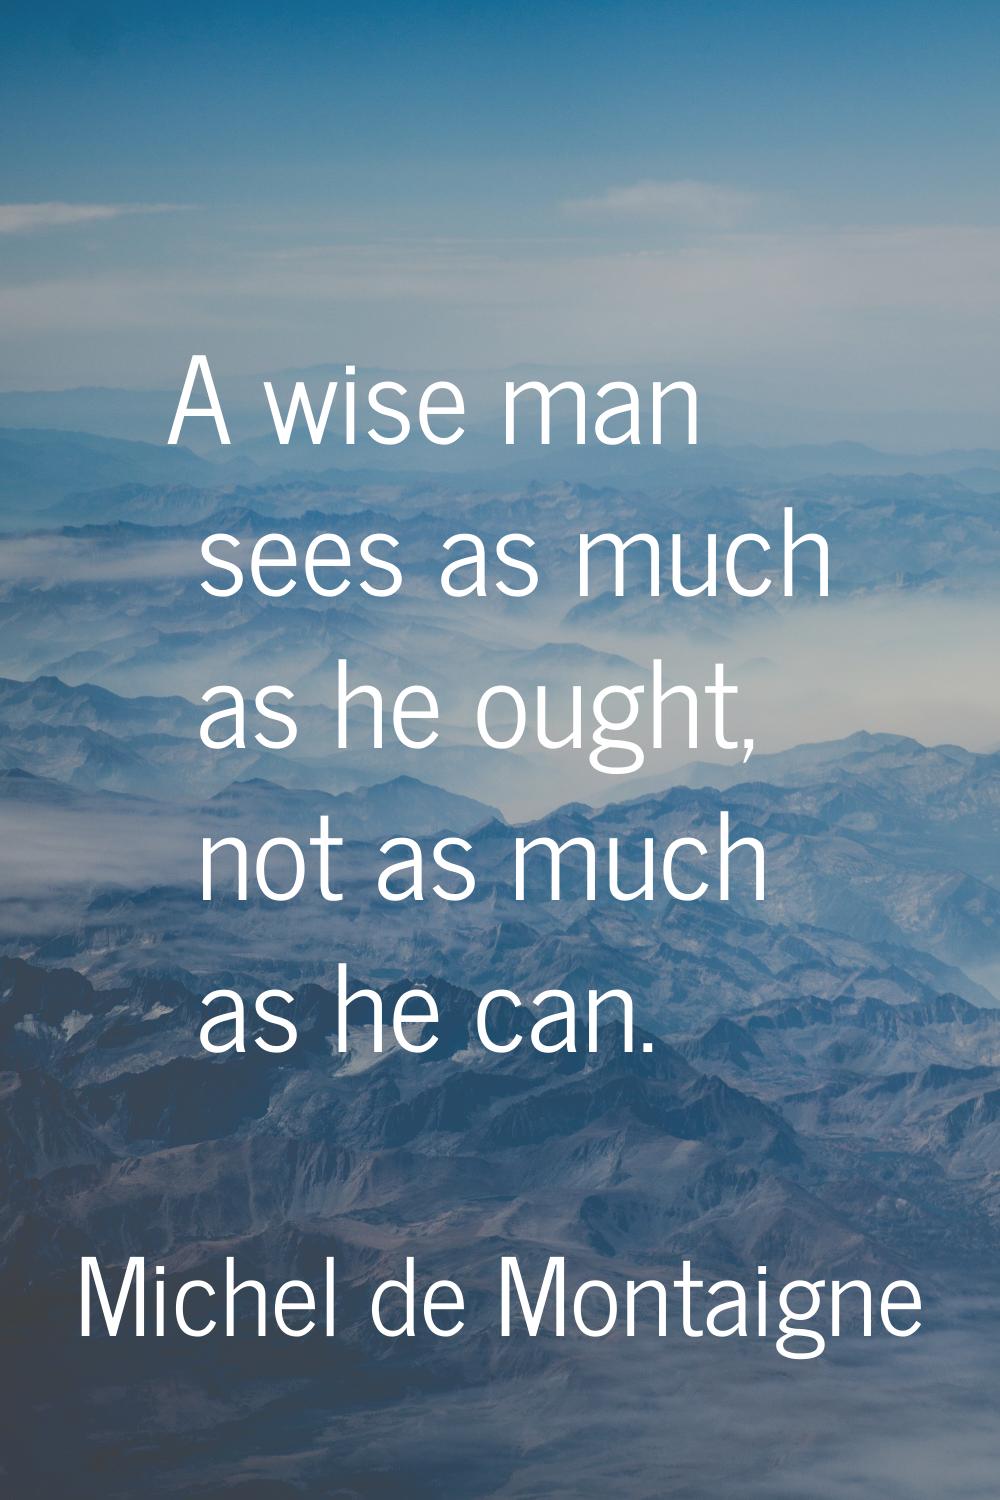 A wise man sees as much as he ought, not as much as he can.